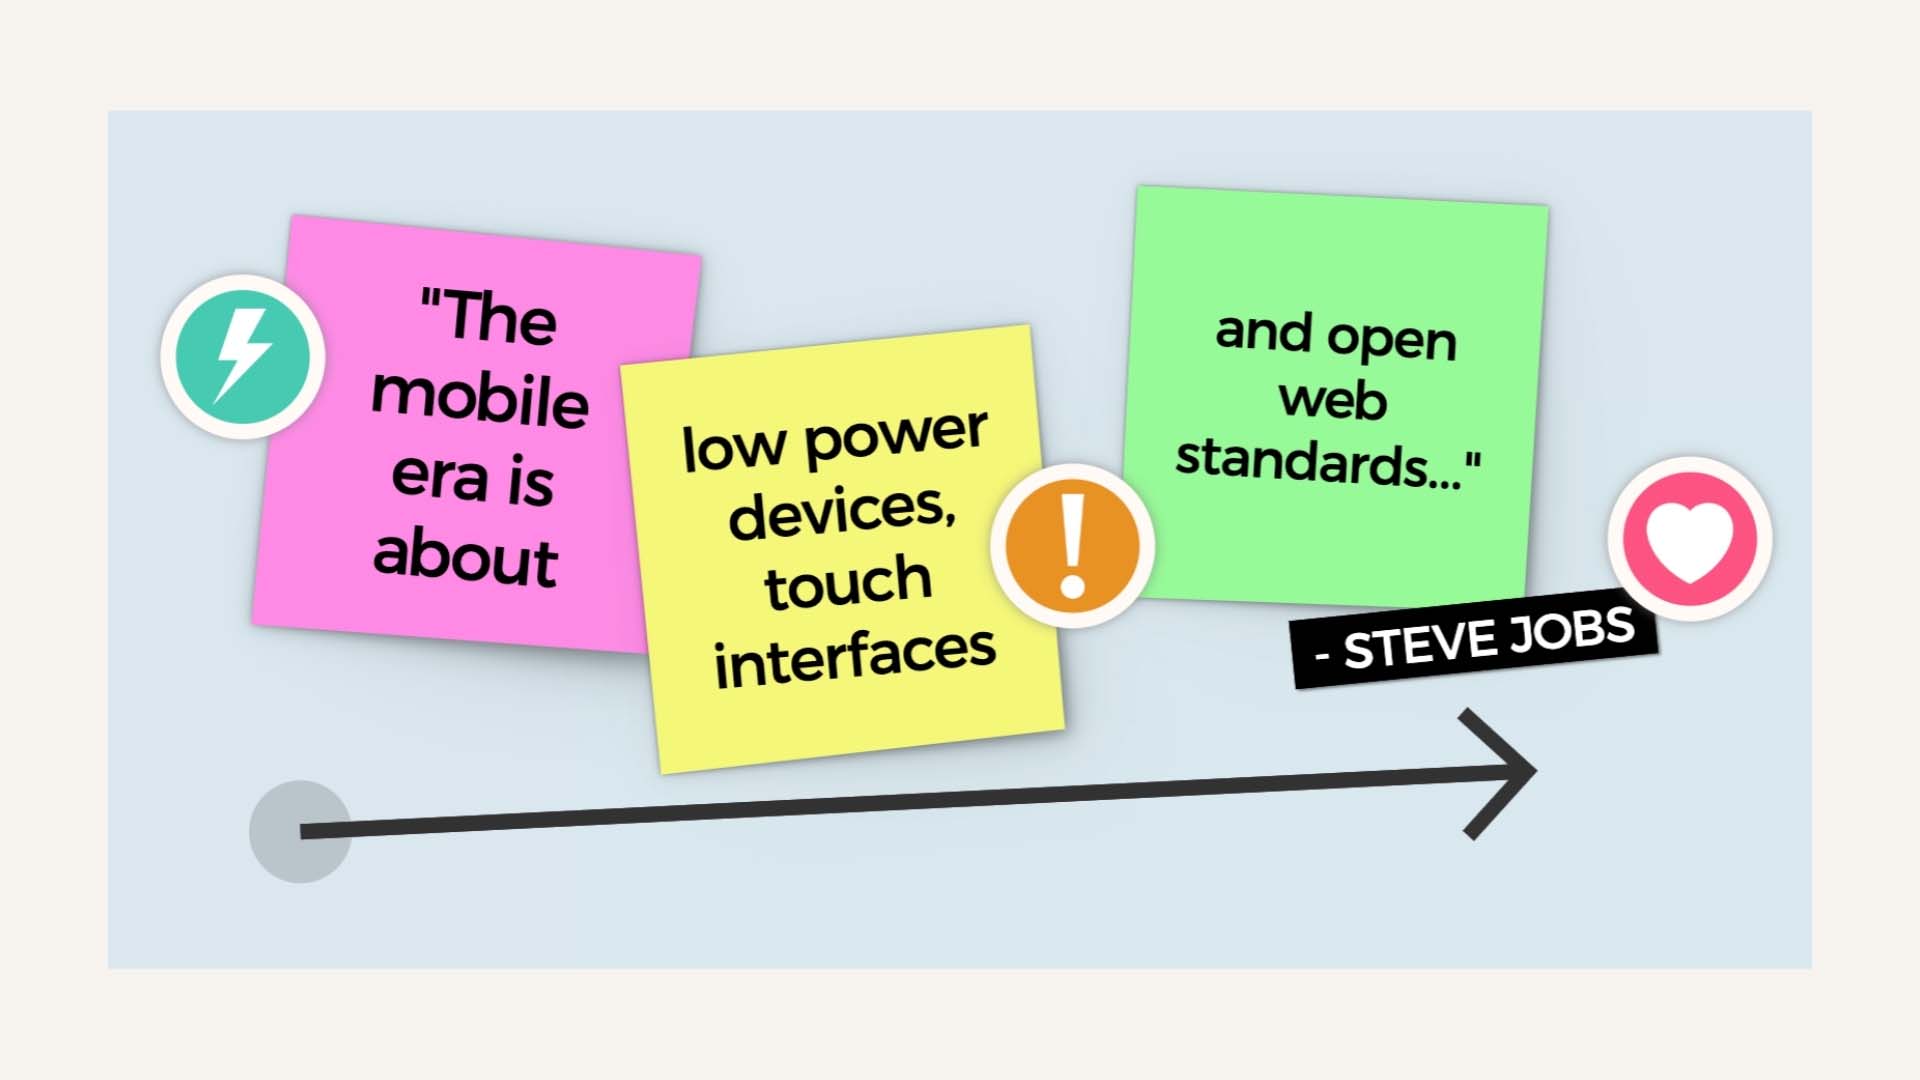 Steve Jobs vision of the future mobile